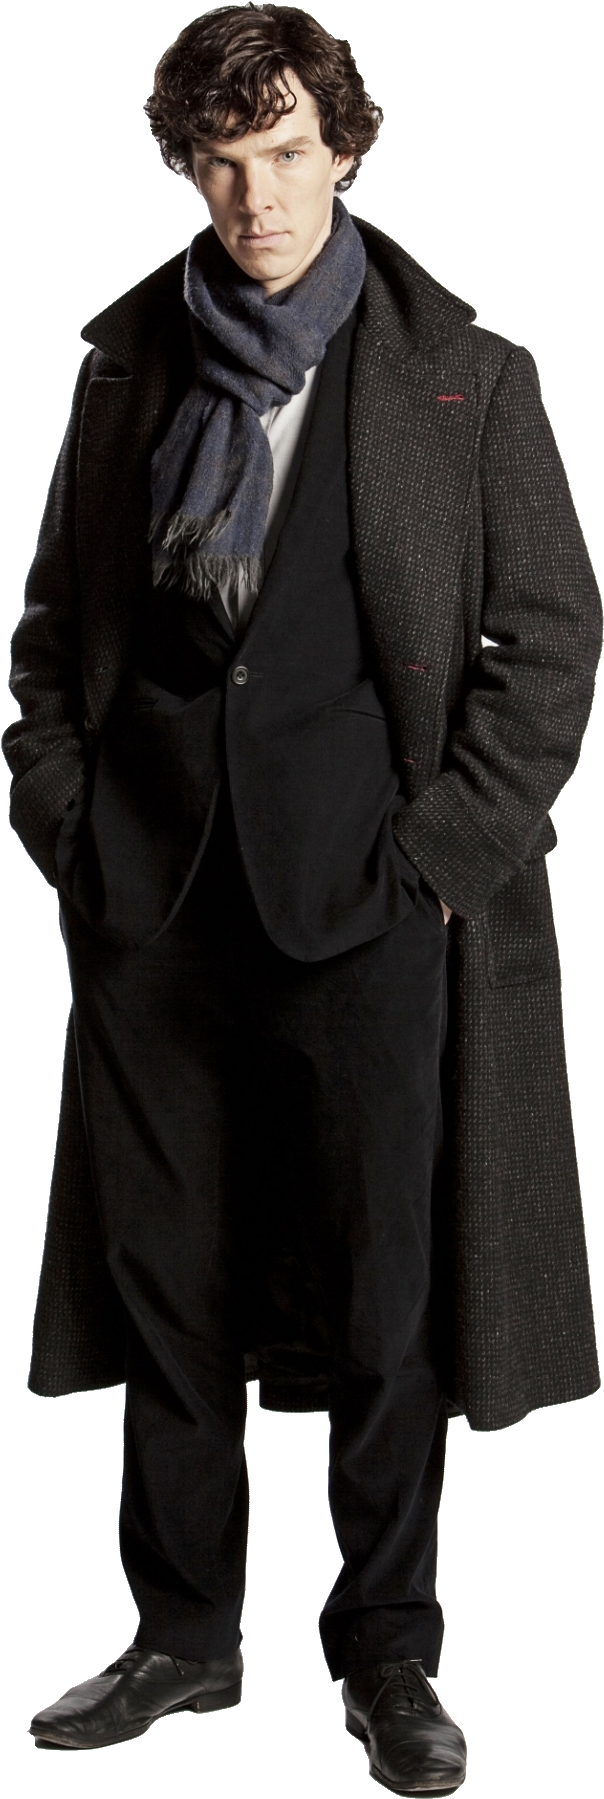 Modern Detective Standing Pose PNG